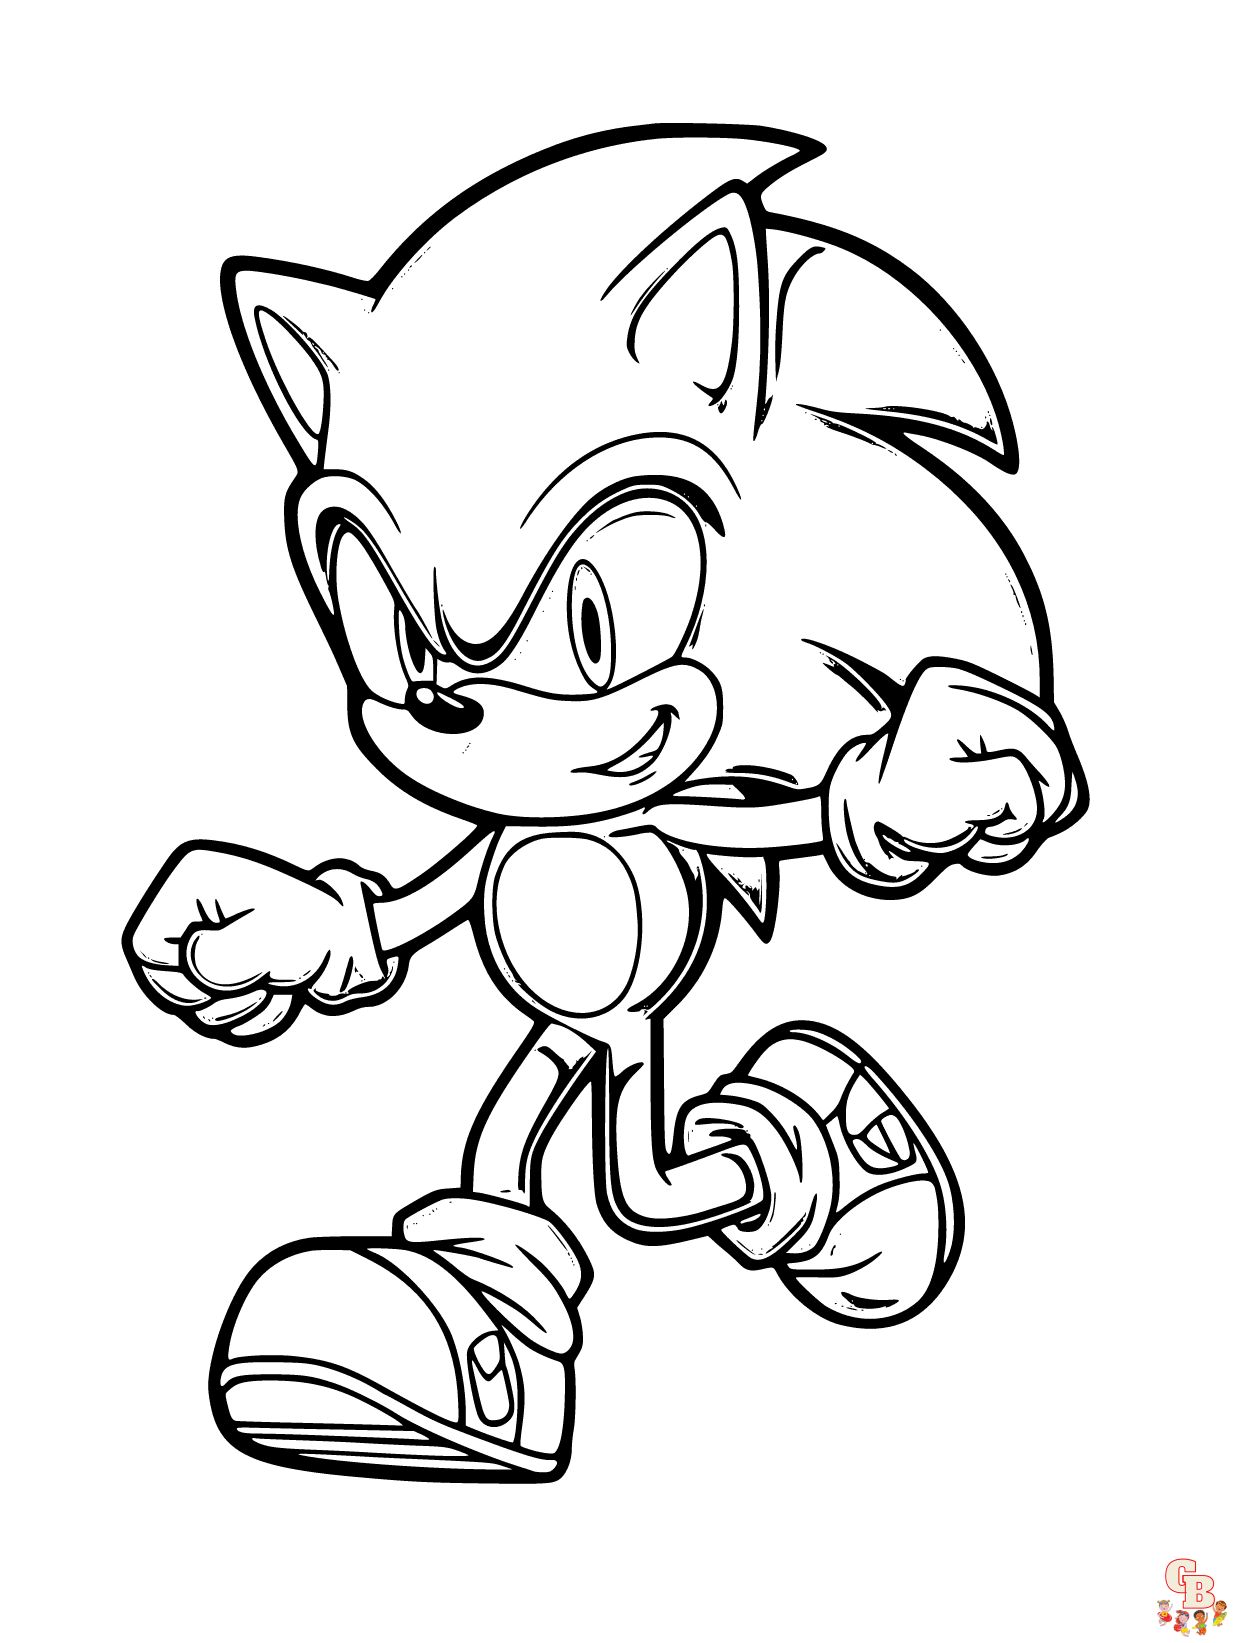 A Colorful Adventure: Exploring Sonic Coloring Pages